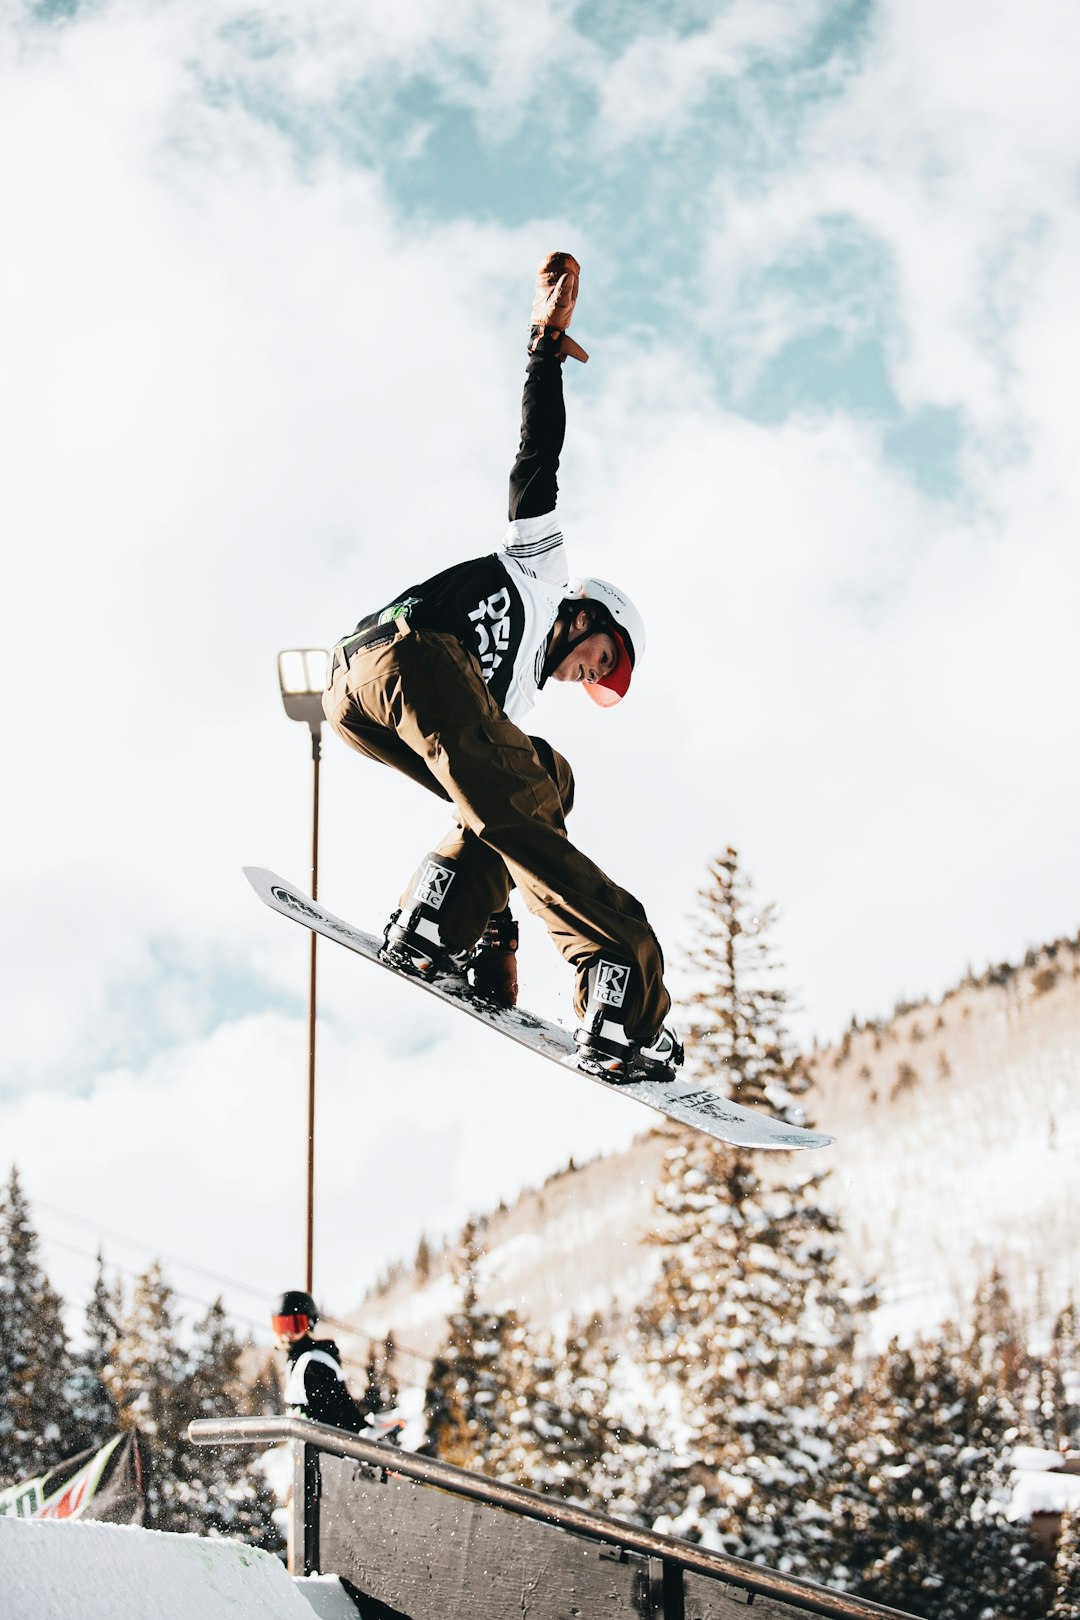 man in black and white jacket and pants riding on snowboard during daytime